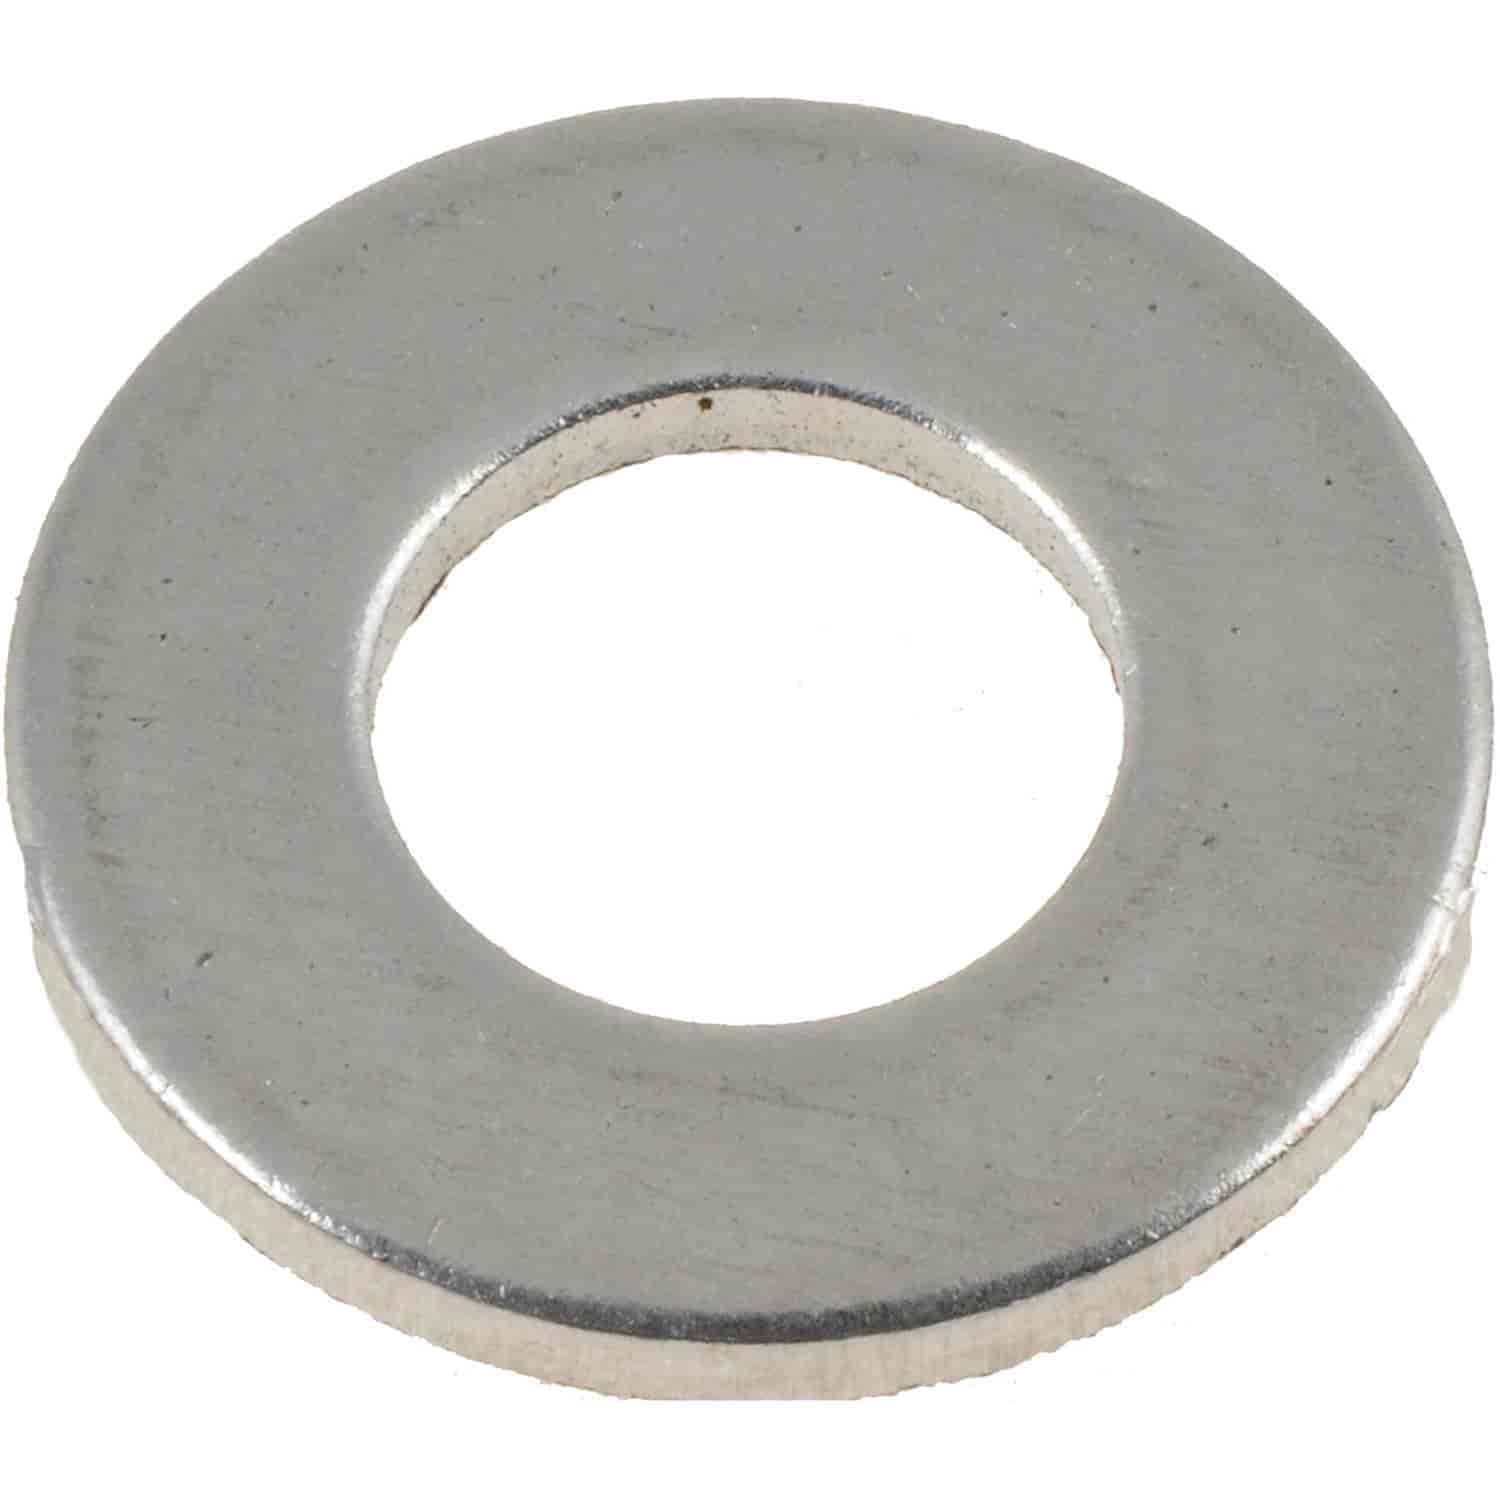 Flat Washer-Grade 5- 5/16 In